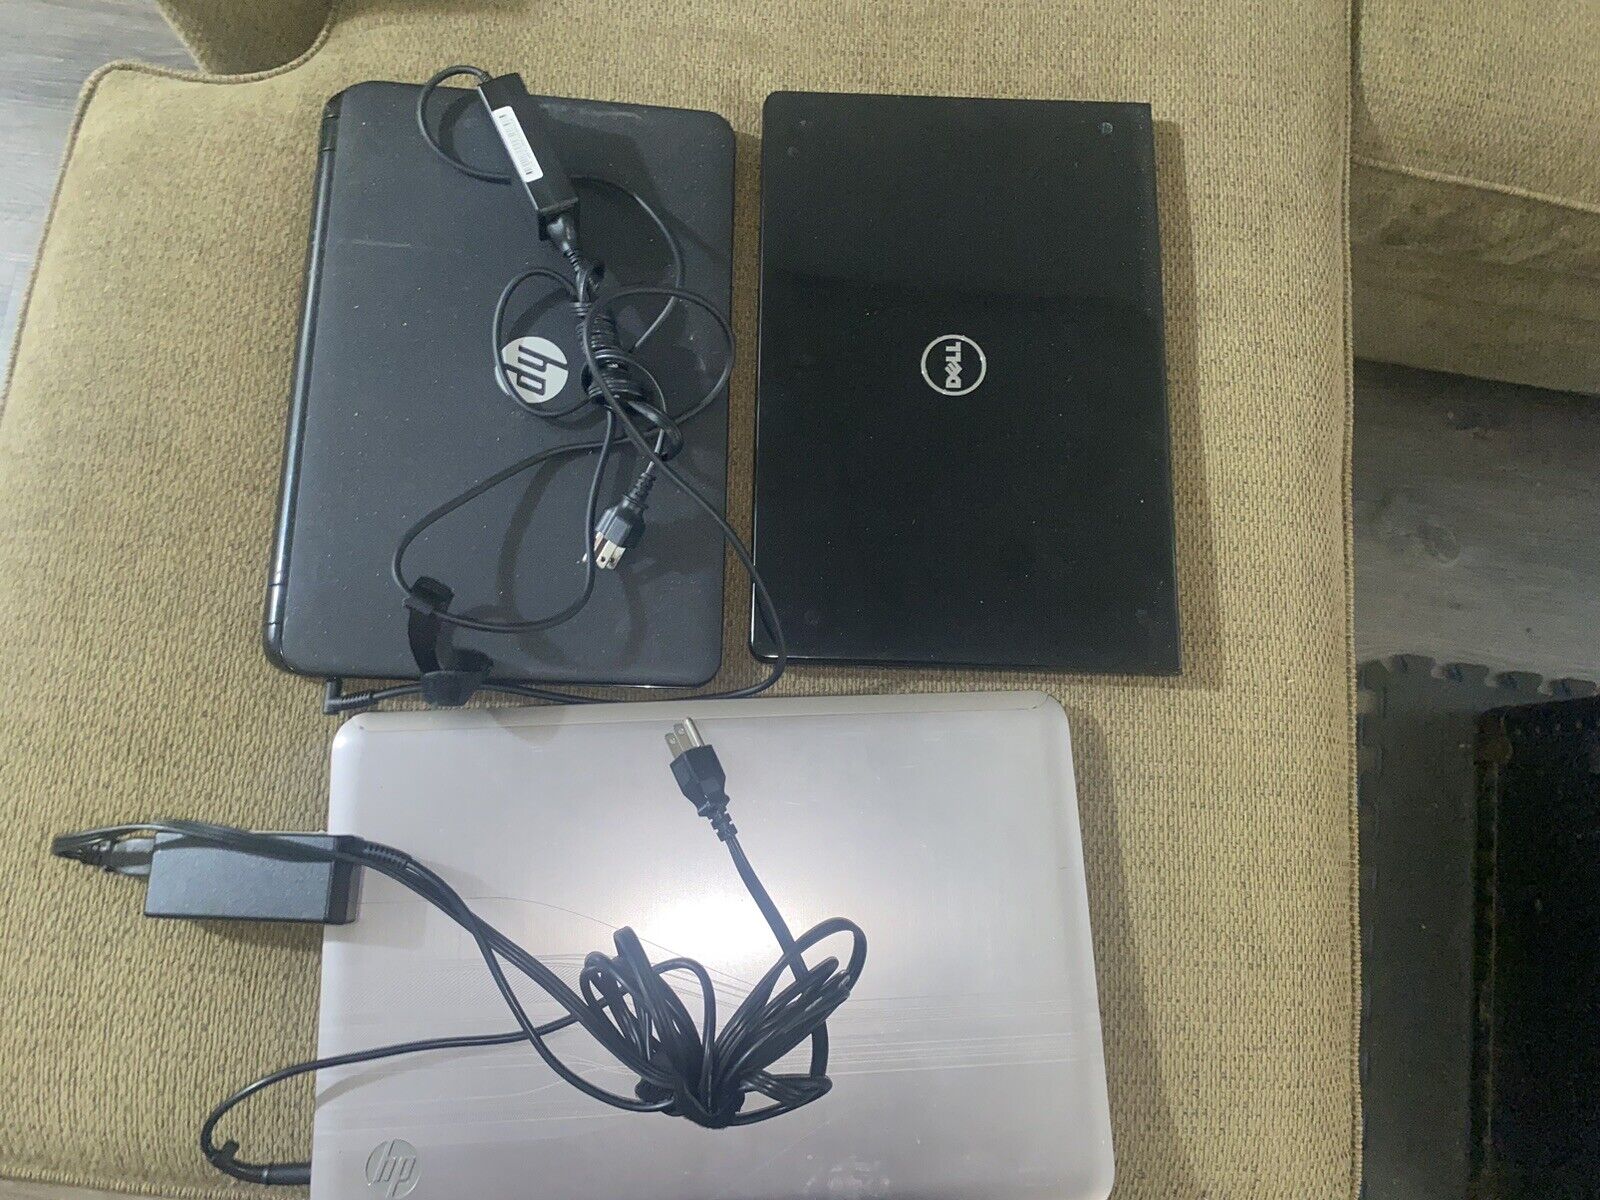 Used Laptop Computers PC - Lot of 3 - 2 HP 1 DELL Parts Only Possibly Working